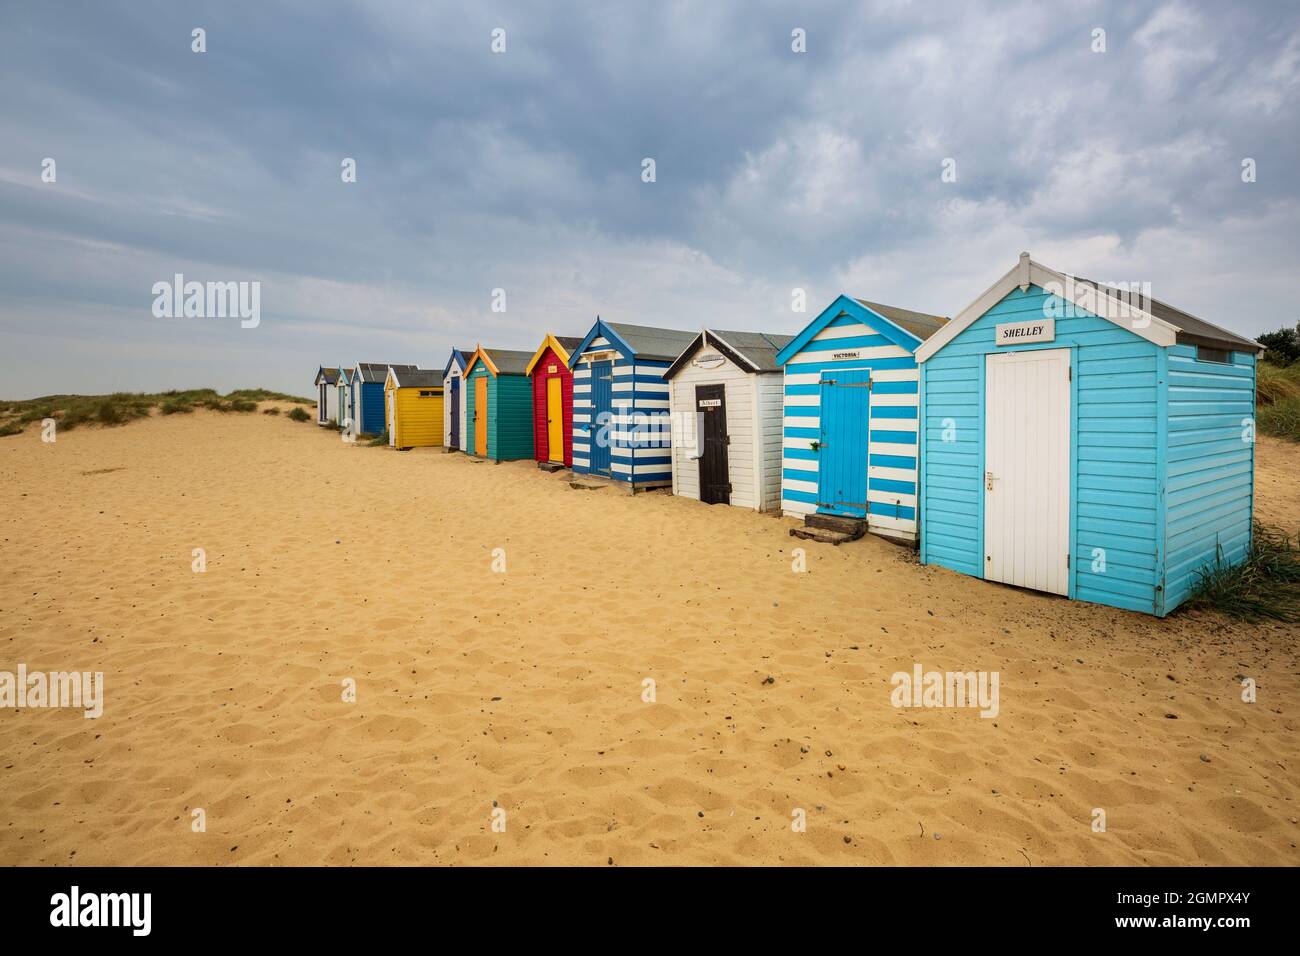 Colourful beach huts among the sand dunes at Southwold, Suffolk, England Stock Photo